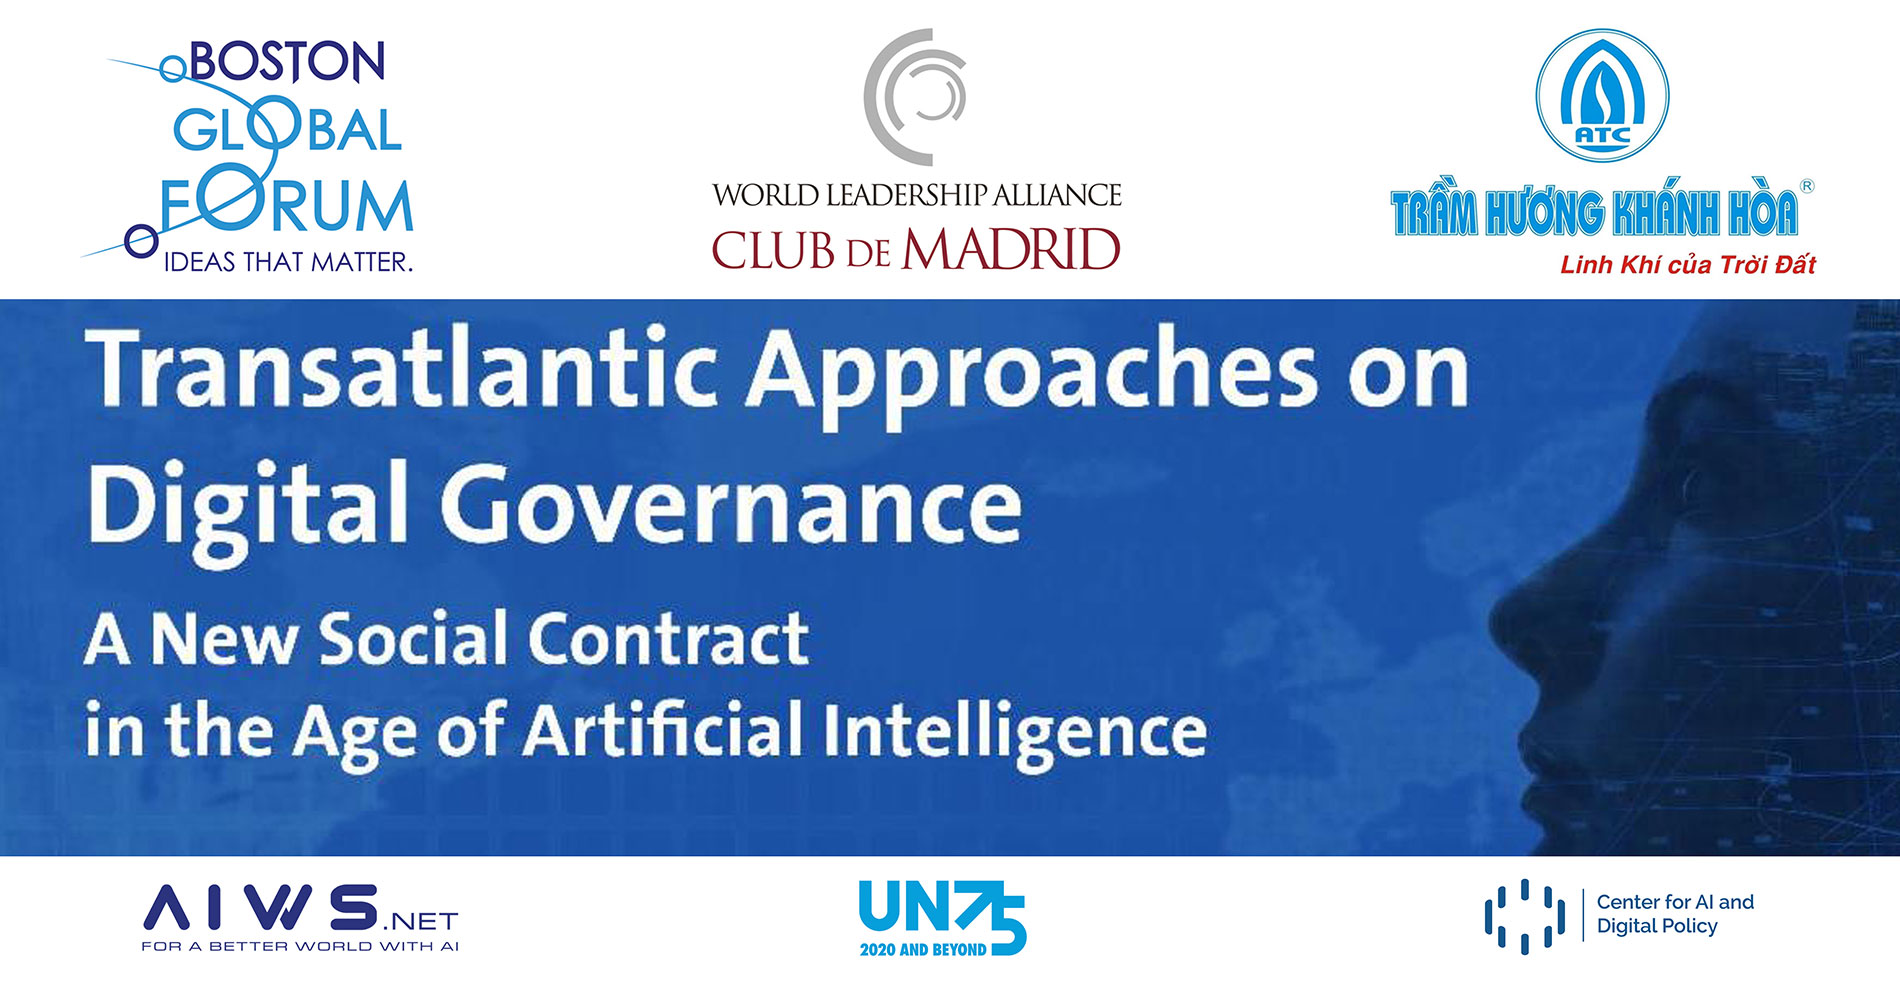 TRANSATLANTIC APPROACHES ON DIGITAL GOVERNANCE A NEW SOCIAL CONTRACT IN THE AGE OF ARTIFICIAL INTELLIGENCE